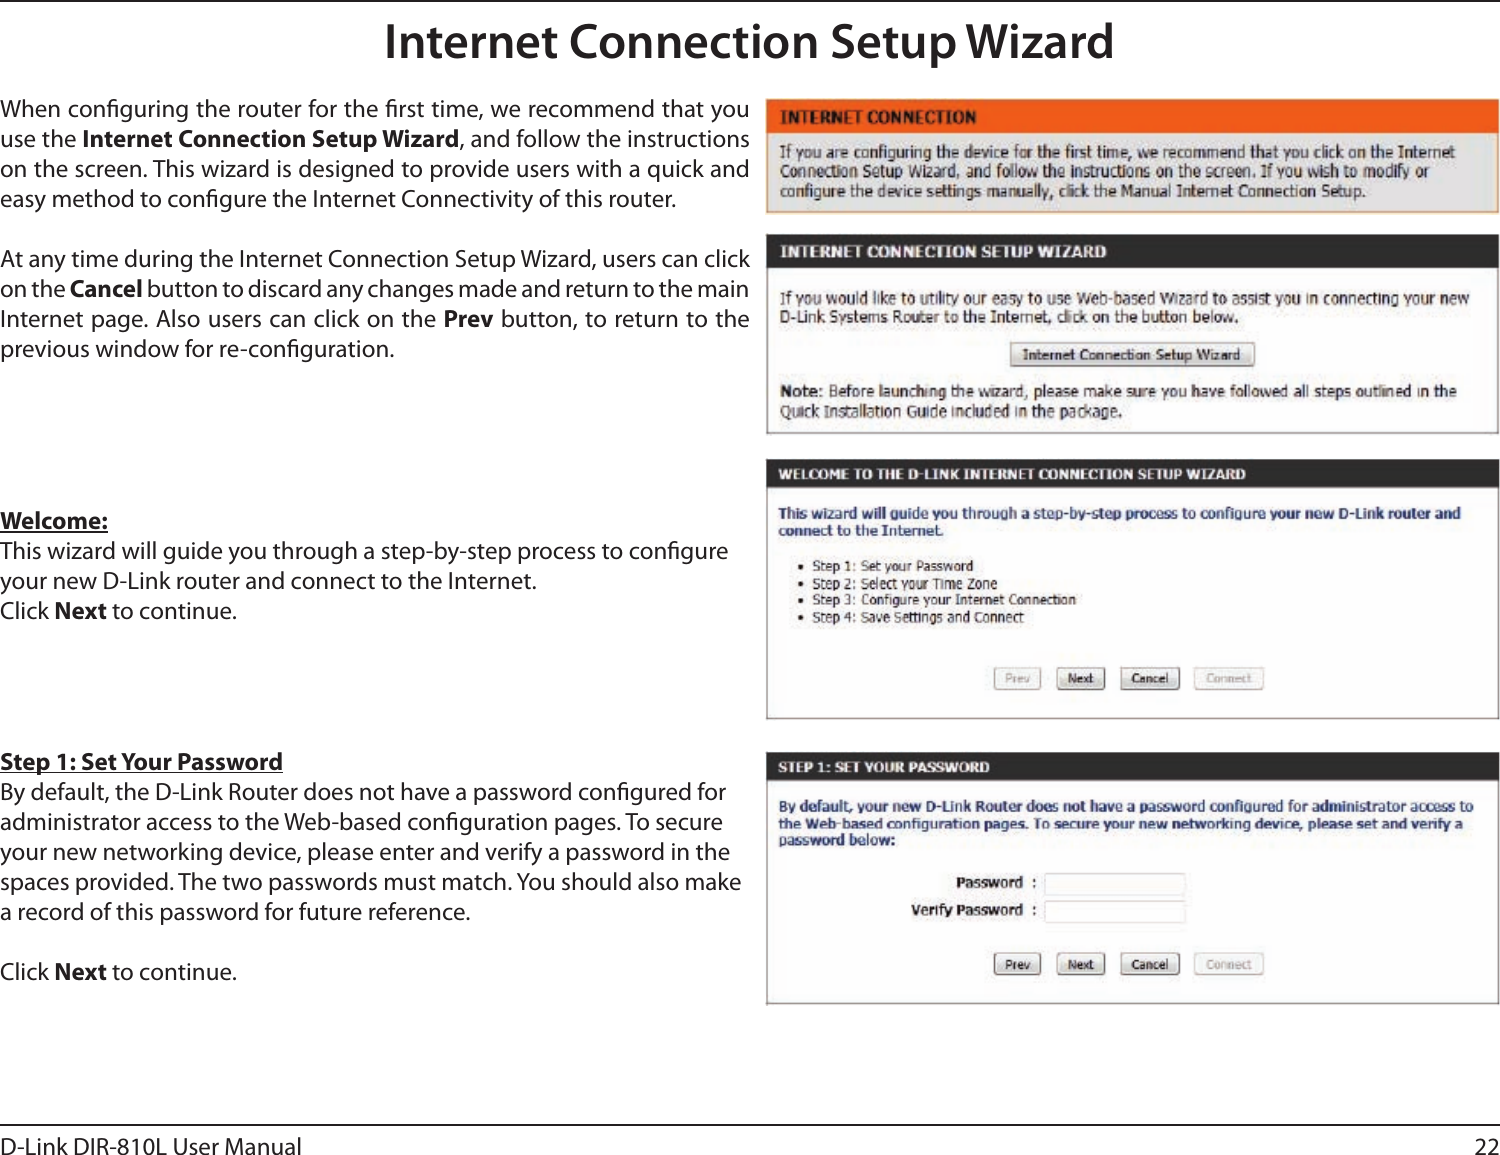 22D-Link DIR-810L User ManualInternet Connection Setup WizardWhen conguring the router for the rst time, we recommend that you use the Internet Connection Setup Wizard, and follow the instructions on the screen. This wizard is designed to provide users with a quick and easy method to congure the Internet Connectivity of this router.At any time during the Internet Connection Setup Wizard, users can click on the Cancel button to discard any changes made and return to the main Internet page. Also users can click on the Prev button, to return to the previous window for re-conguration.Welcome:This wizard will guide you through a step-by-step process to congure your new D-Link router and connect to the Internet. Click Next to continue.Step 1: Set Your PasswordBy default, the D-Link Router does not have a password congured for administrator access to the Web-based conguration pages. To secure your new networking device, please enter and verify a password in the spaces provided. The two passwords must match. You should also make a record of this password for future reference. Click Next to continue.